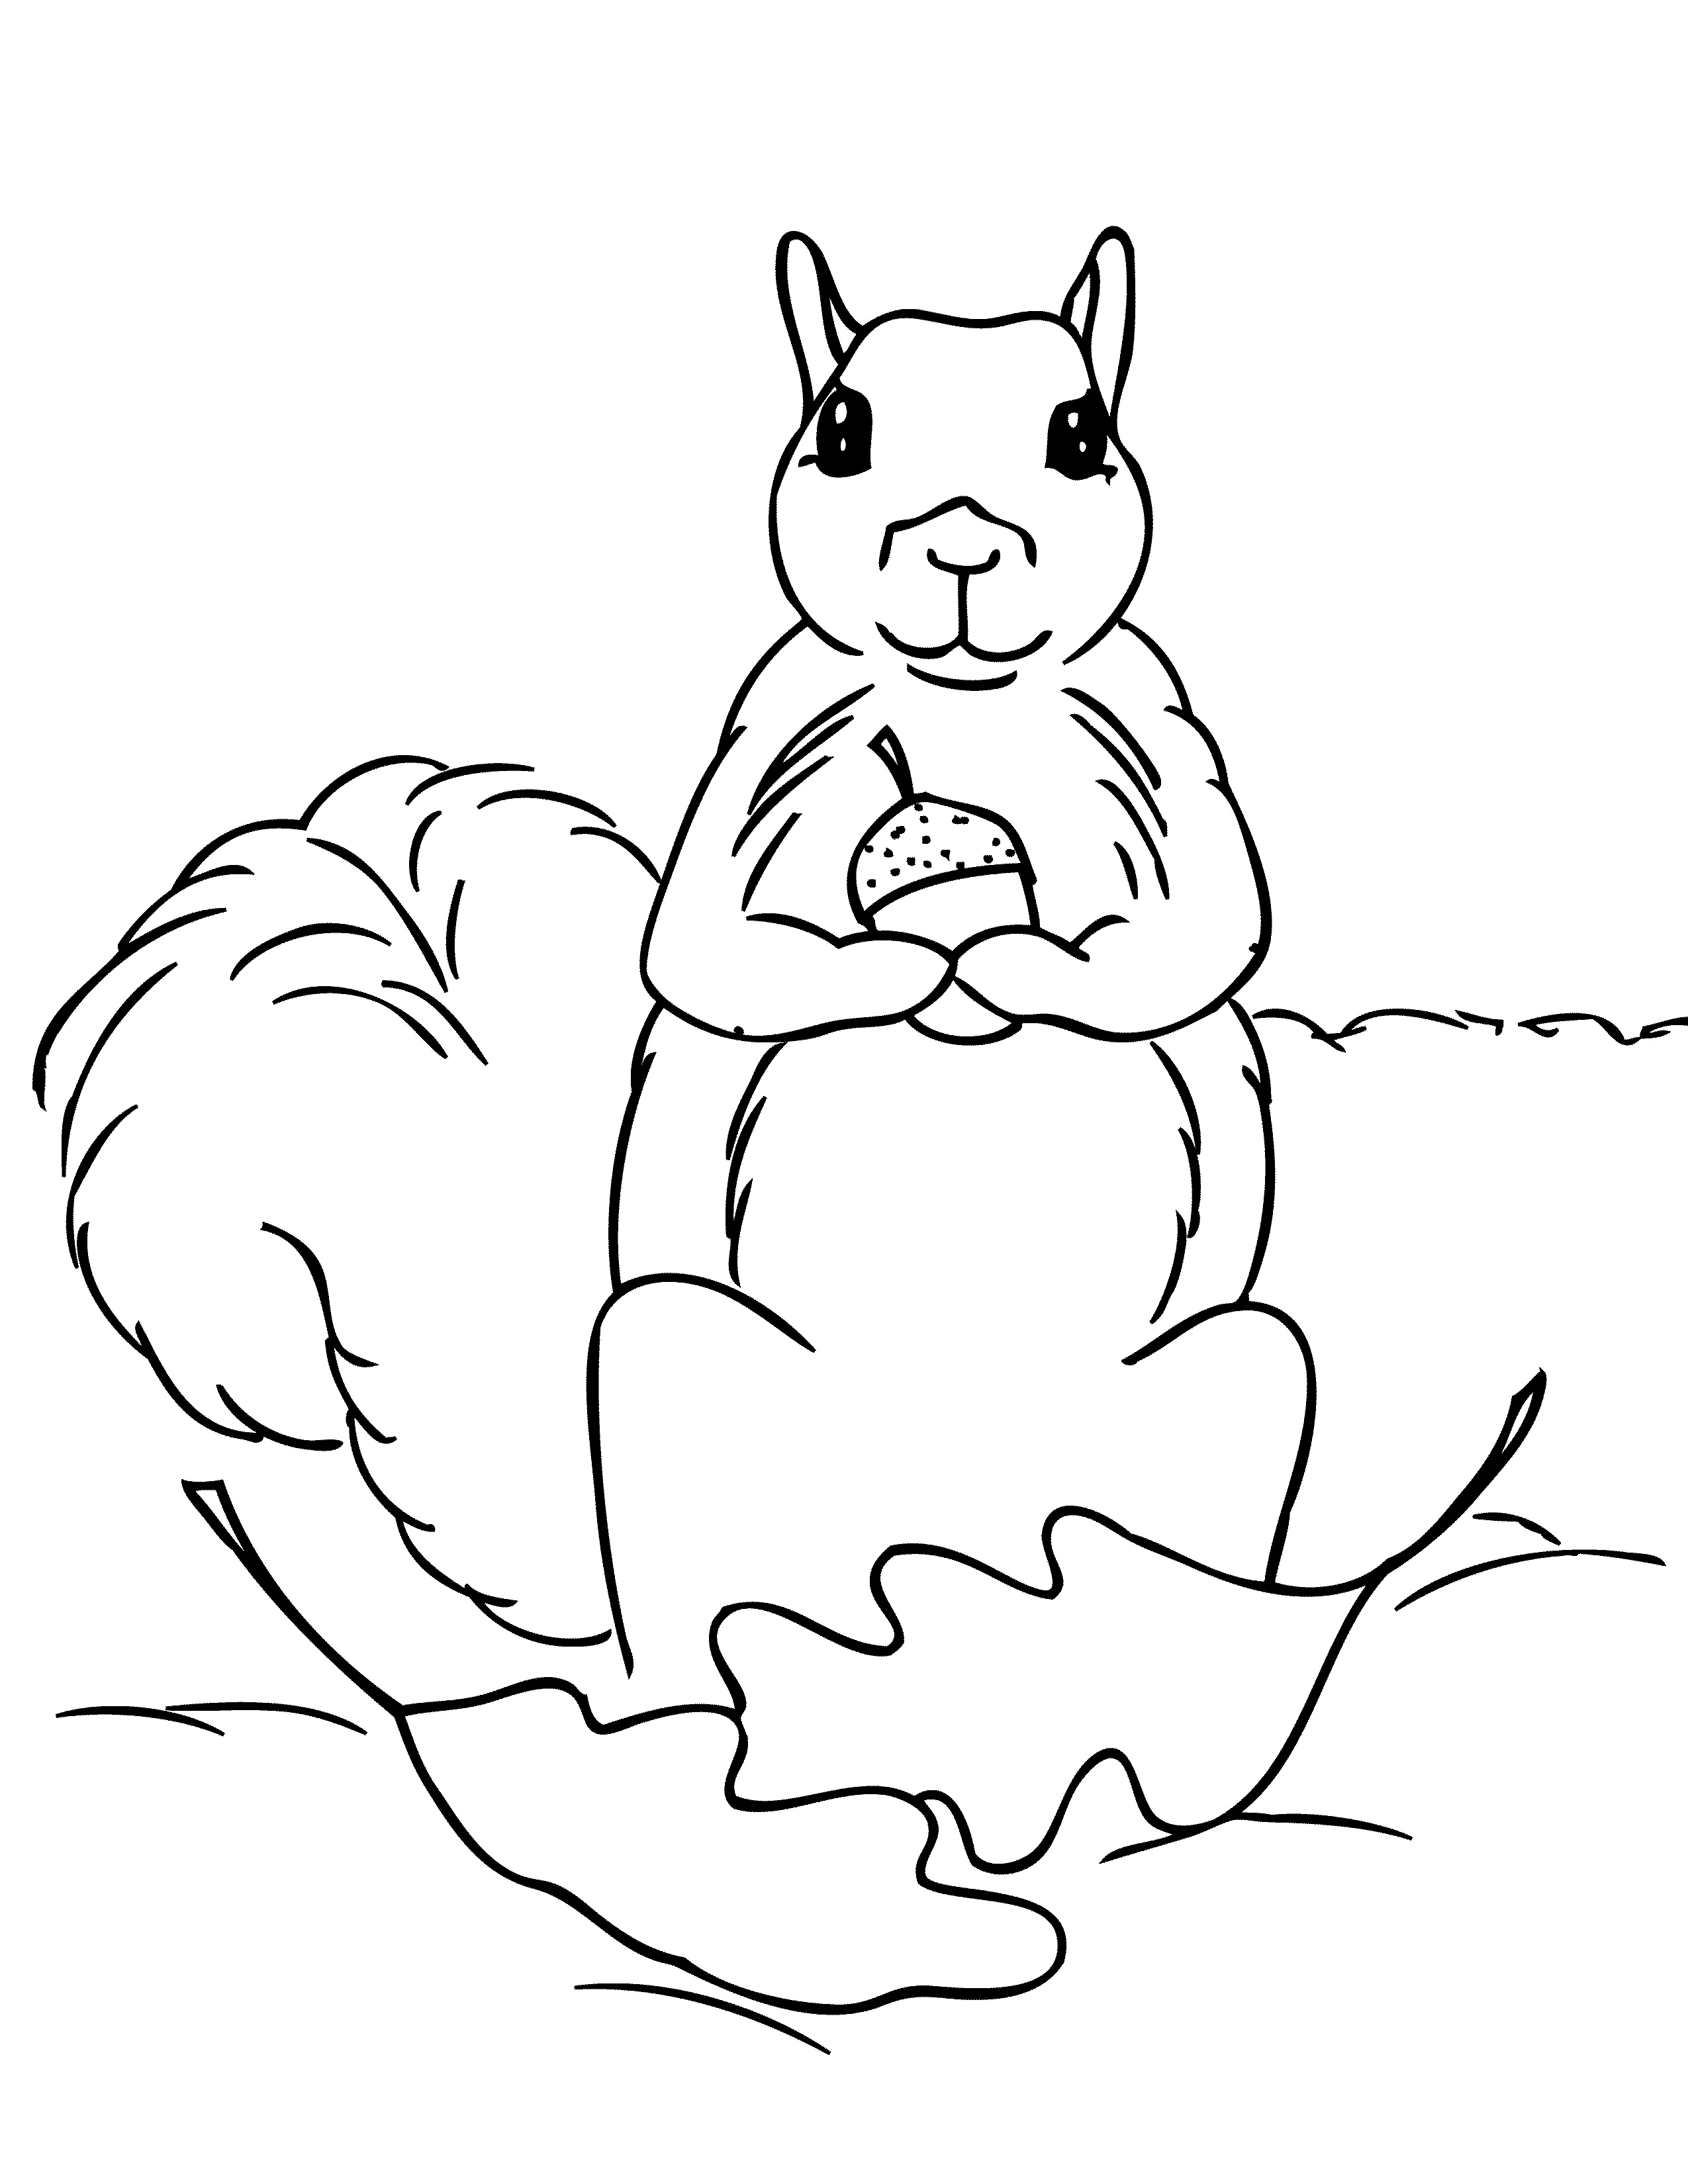 squirrel colouring free printable squirrel coloring pages for kids animal place squirrel colouring 